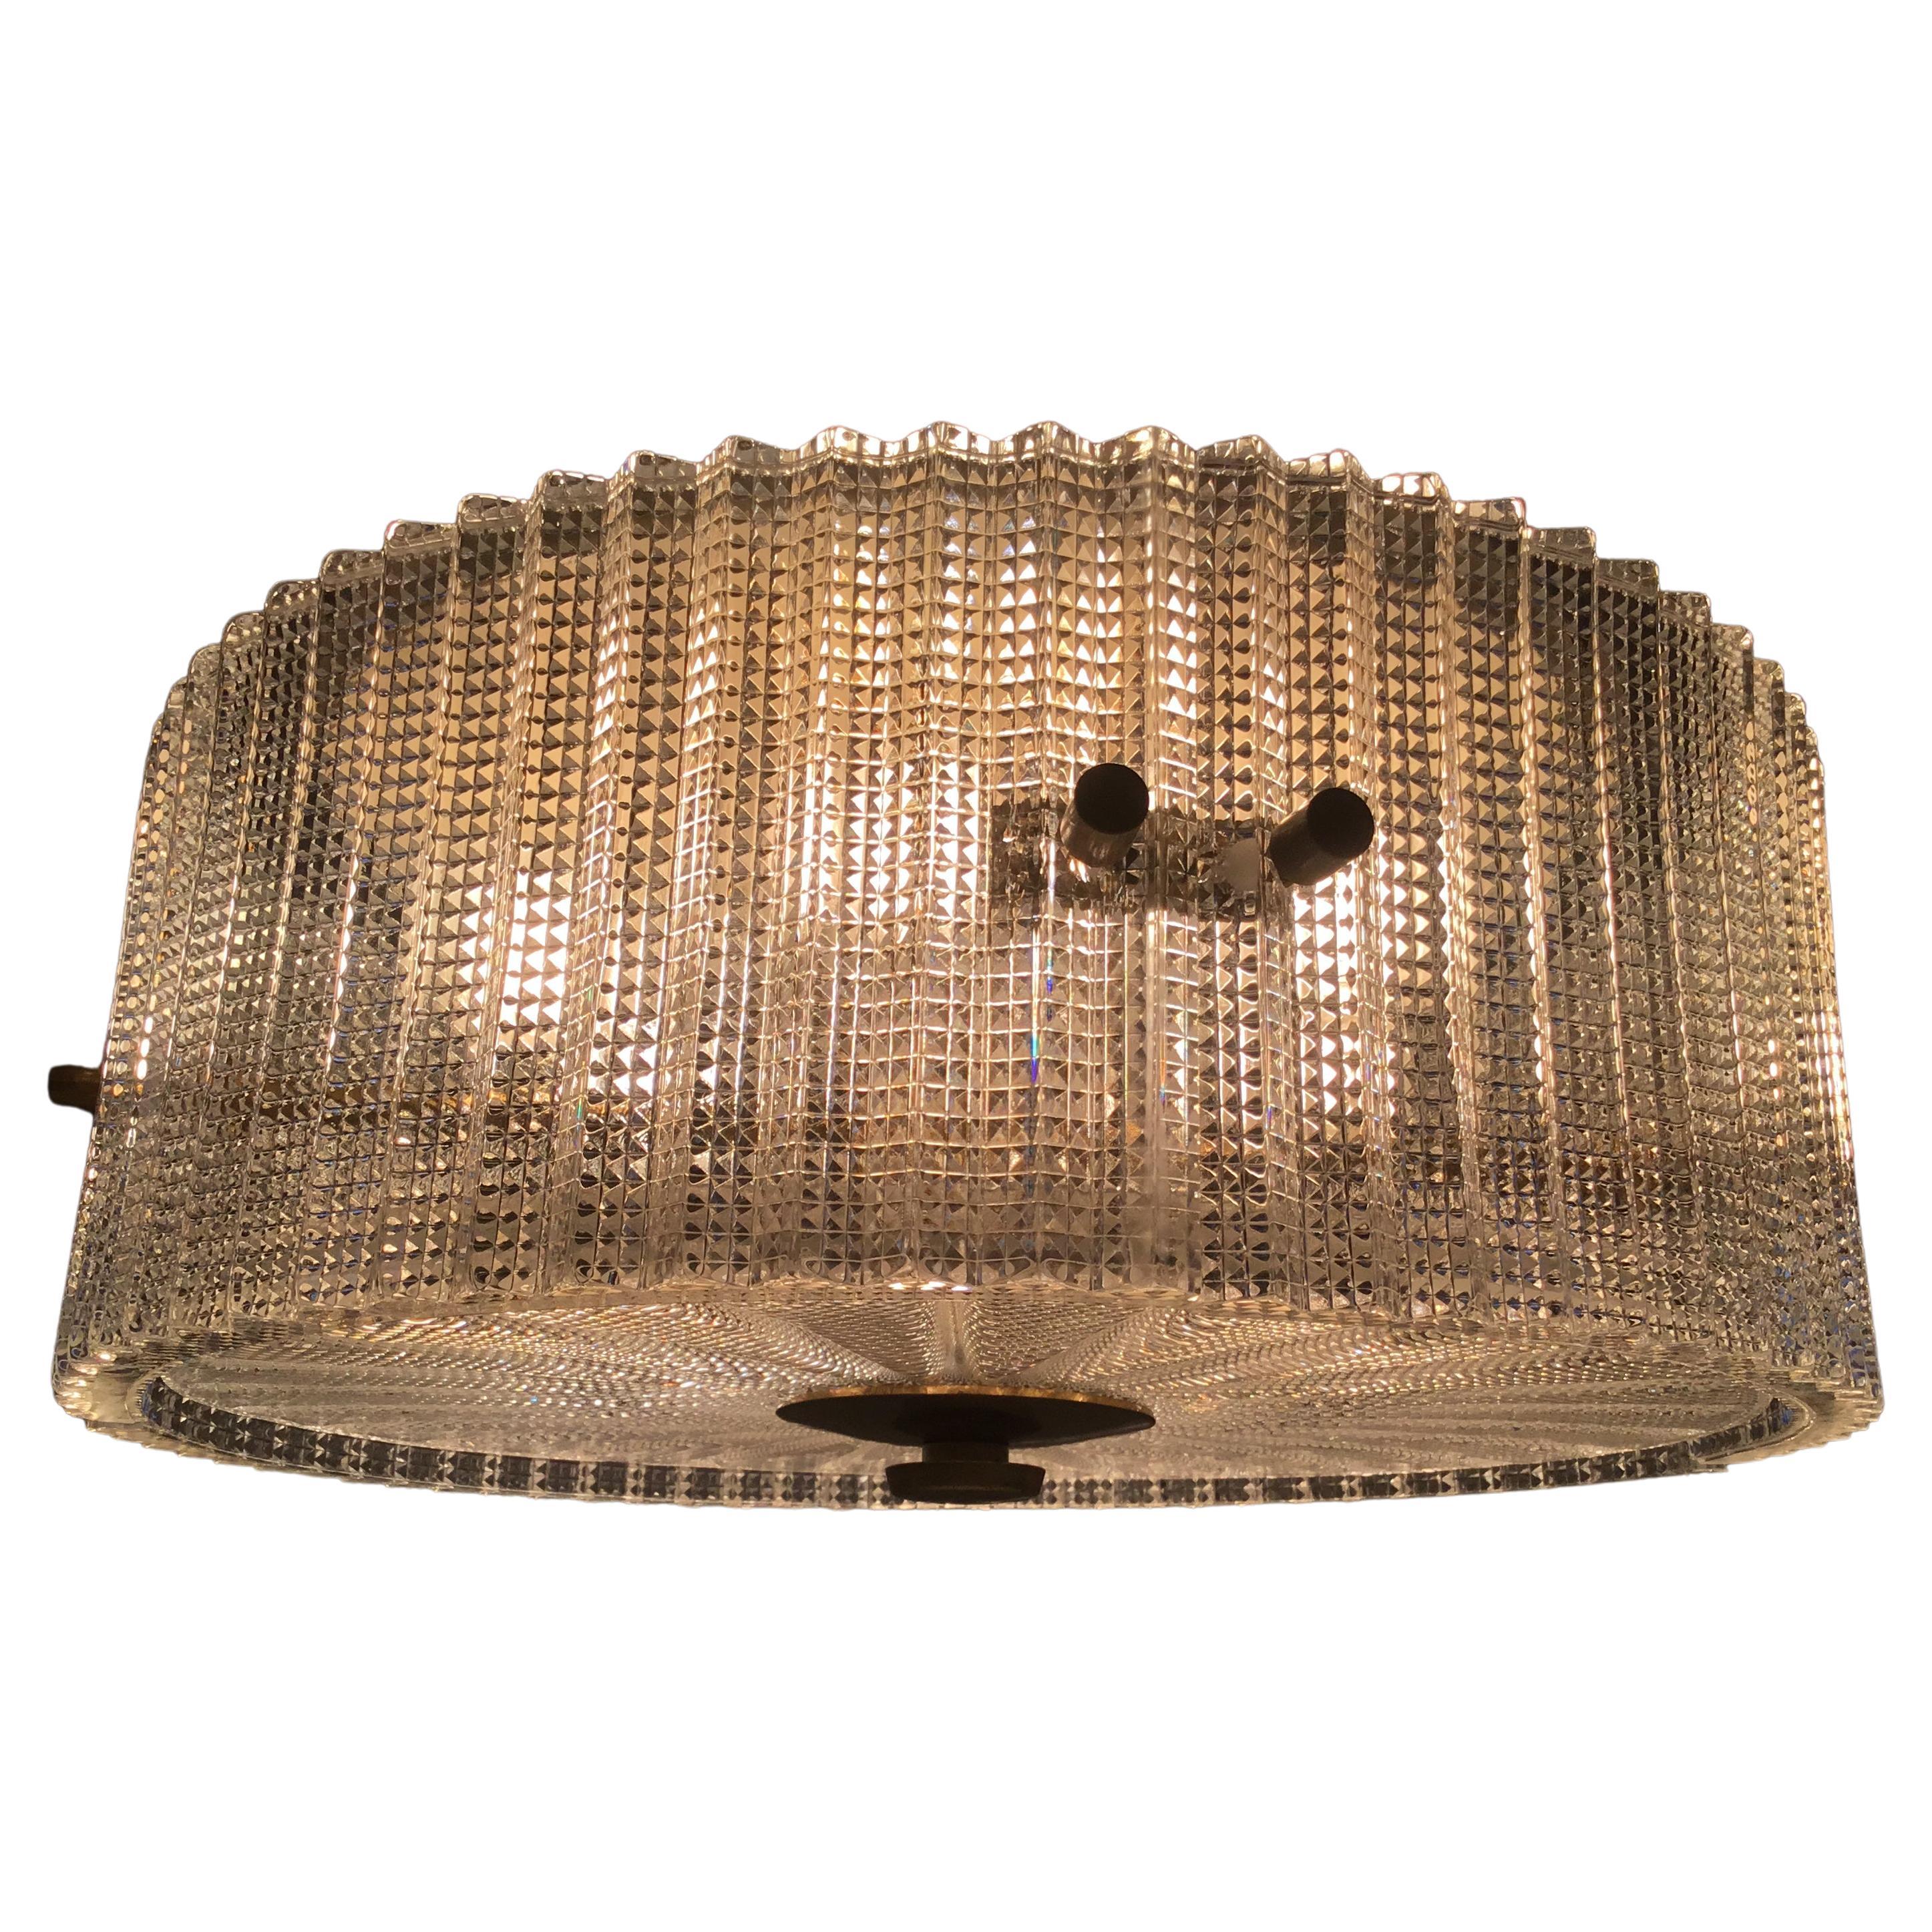 Large ceiling lamp Chandelier by the Swedish designer Carl Fagerlund for Orrefors, produced in the 1960s. 
The lamp is made of pressed translucent glass. The inside frame is made of brass and metal and it fitted with six sockets.
The ceiling lamp is